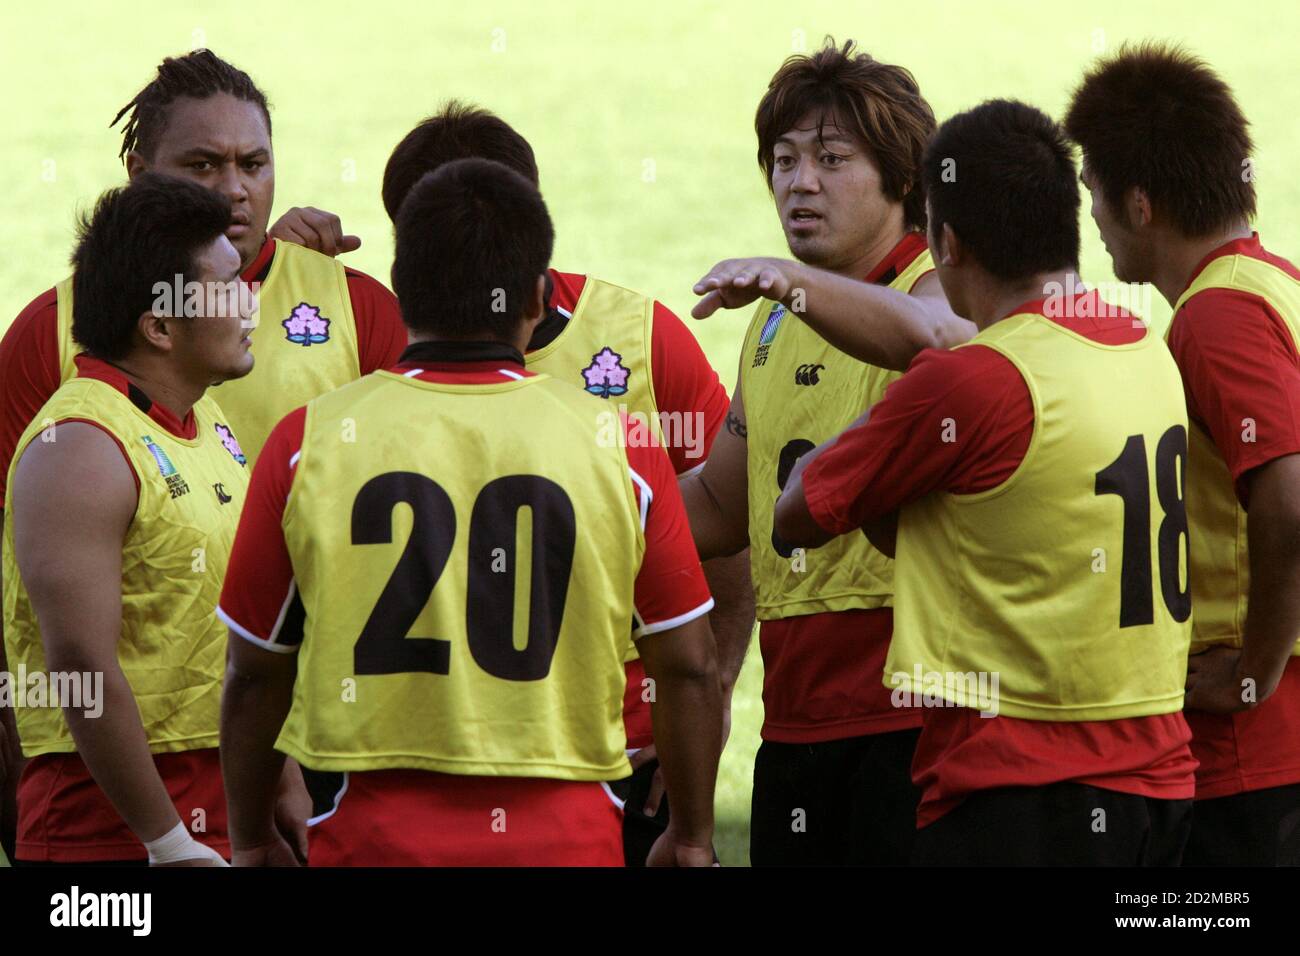 Japan rugby team captain Takuro Miuchi (C) gestures during rugby training session at stadium Michel Bendicou in Colomiers, southwestern France, September 15, 2007. Japan plays in Pool B with Australia, Wales, Fiji and Canada in the Rugby World Cup 2007 REUTERS/Jean-Philippe Arles (FRANCE) Stock Photo